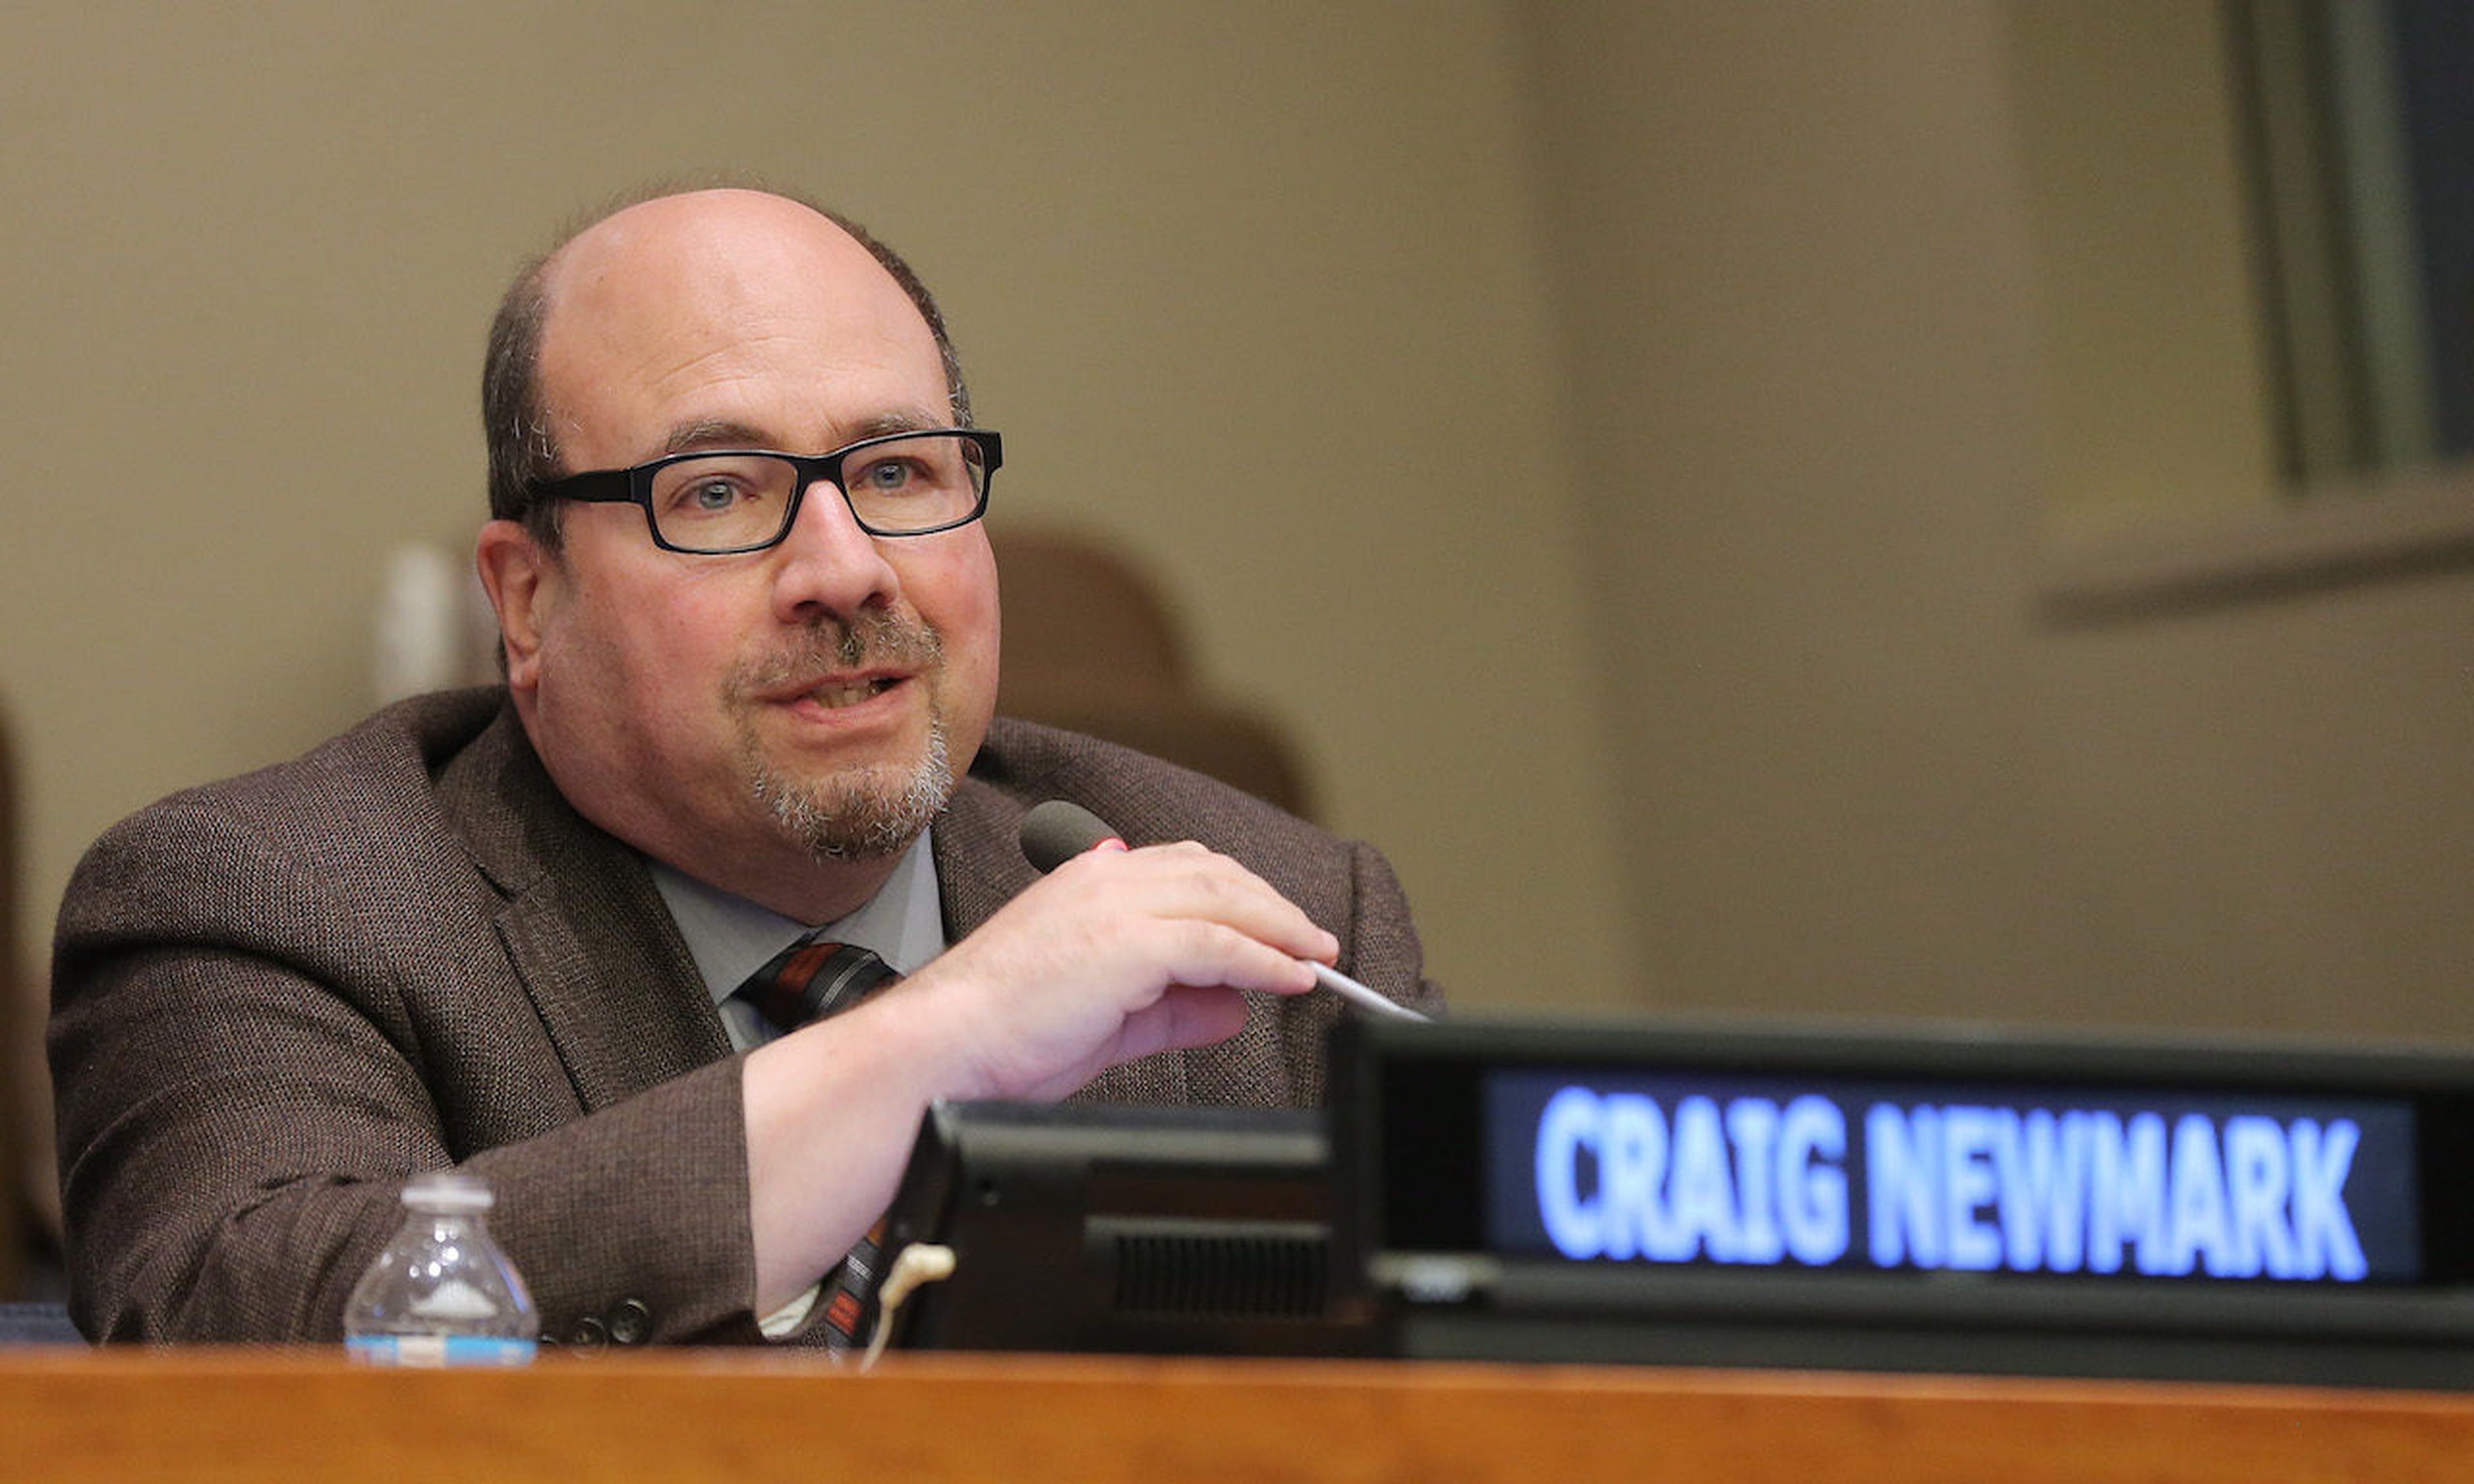 Founder of Craigslist Craig Newmark speaks about investing in woman-owned businesses at the United Nations in 2015. Craig Newmark Philanthropies has historically committed funds to cybersecurity causes and signed a letter this month calling for large philanthropic foundations and internet billionaires to consider doing the same. (Photo by Jemal Cou...